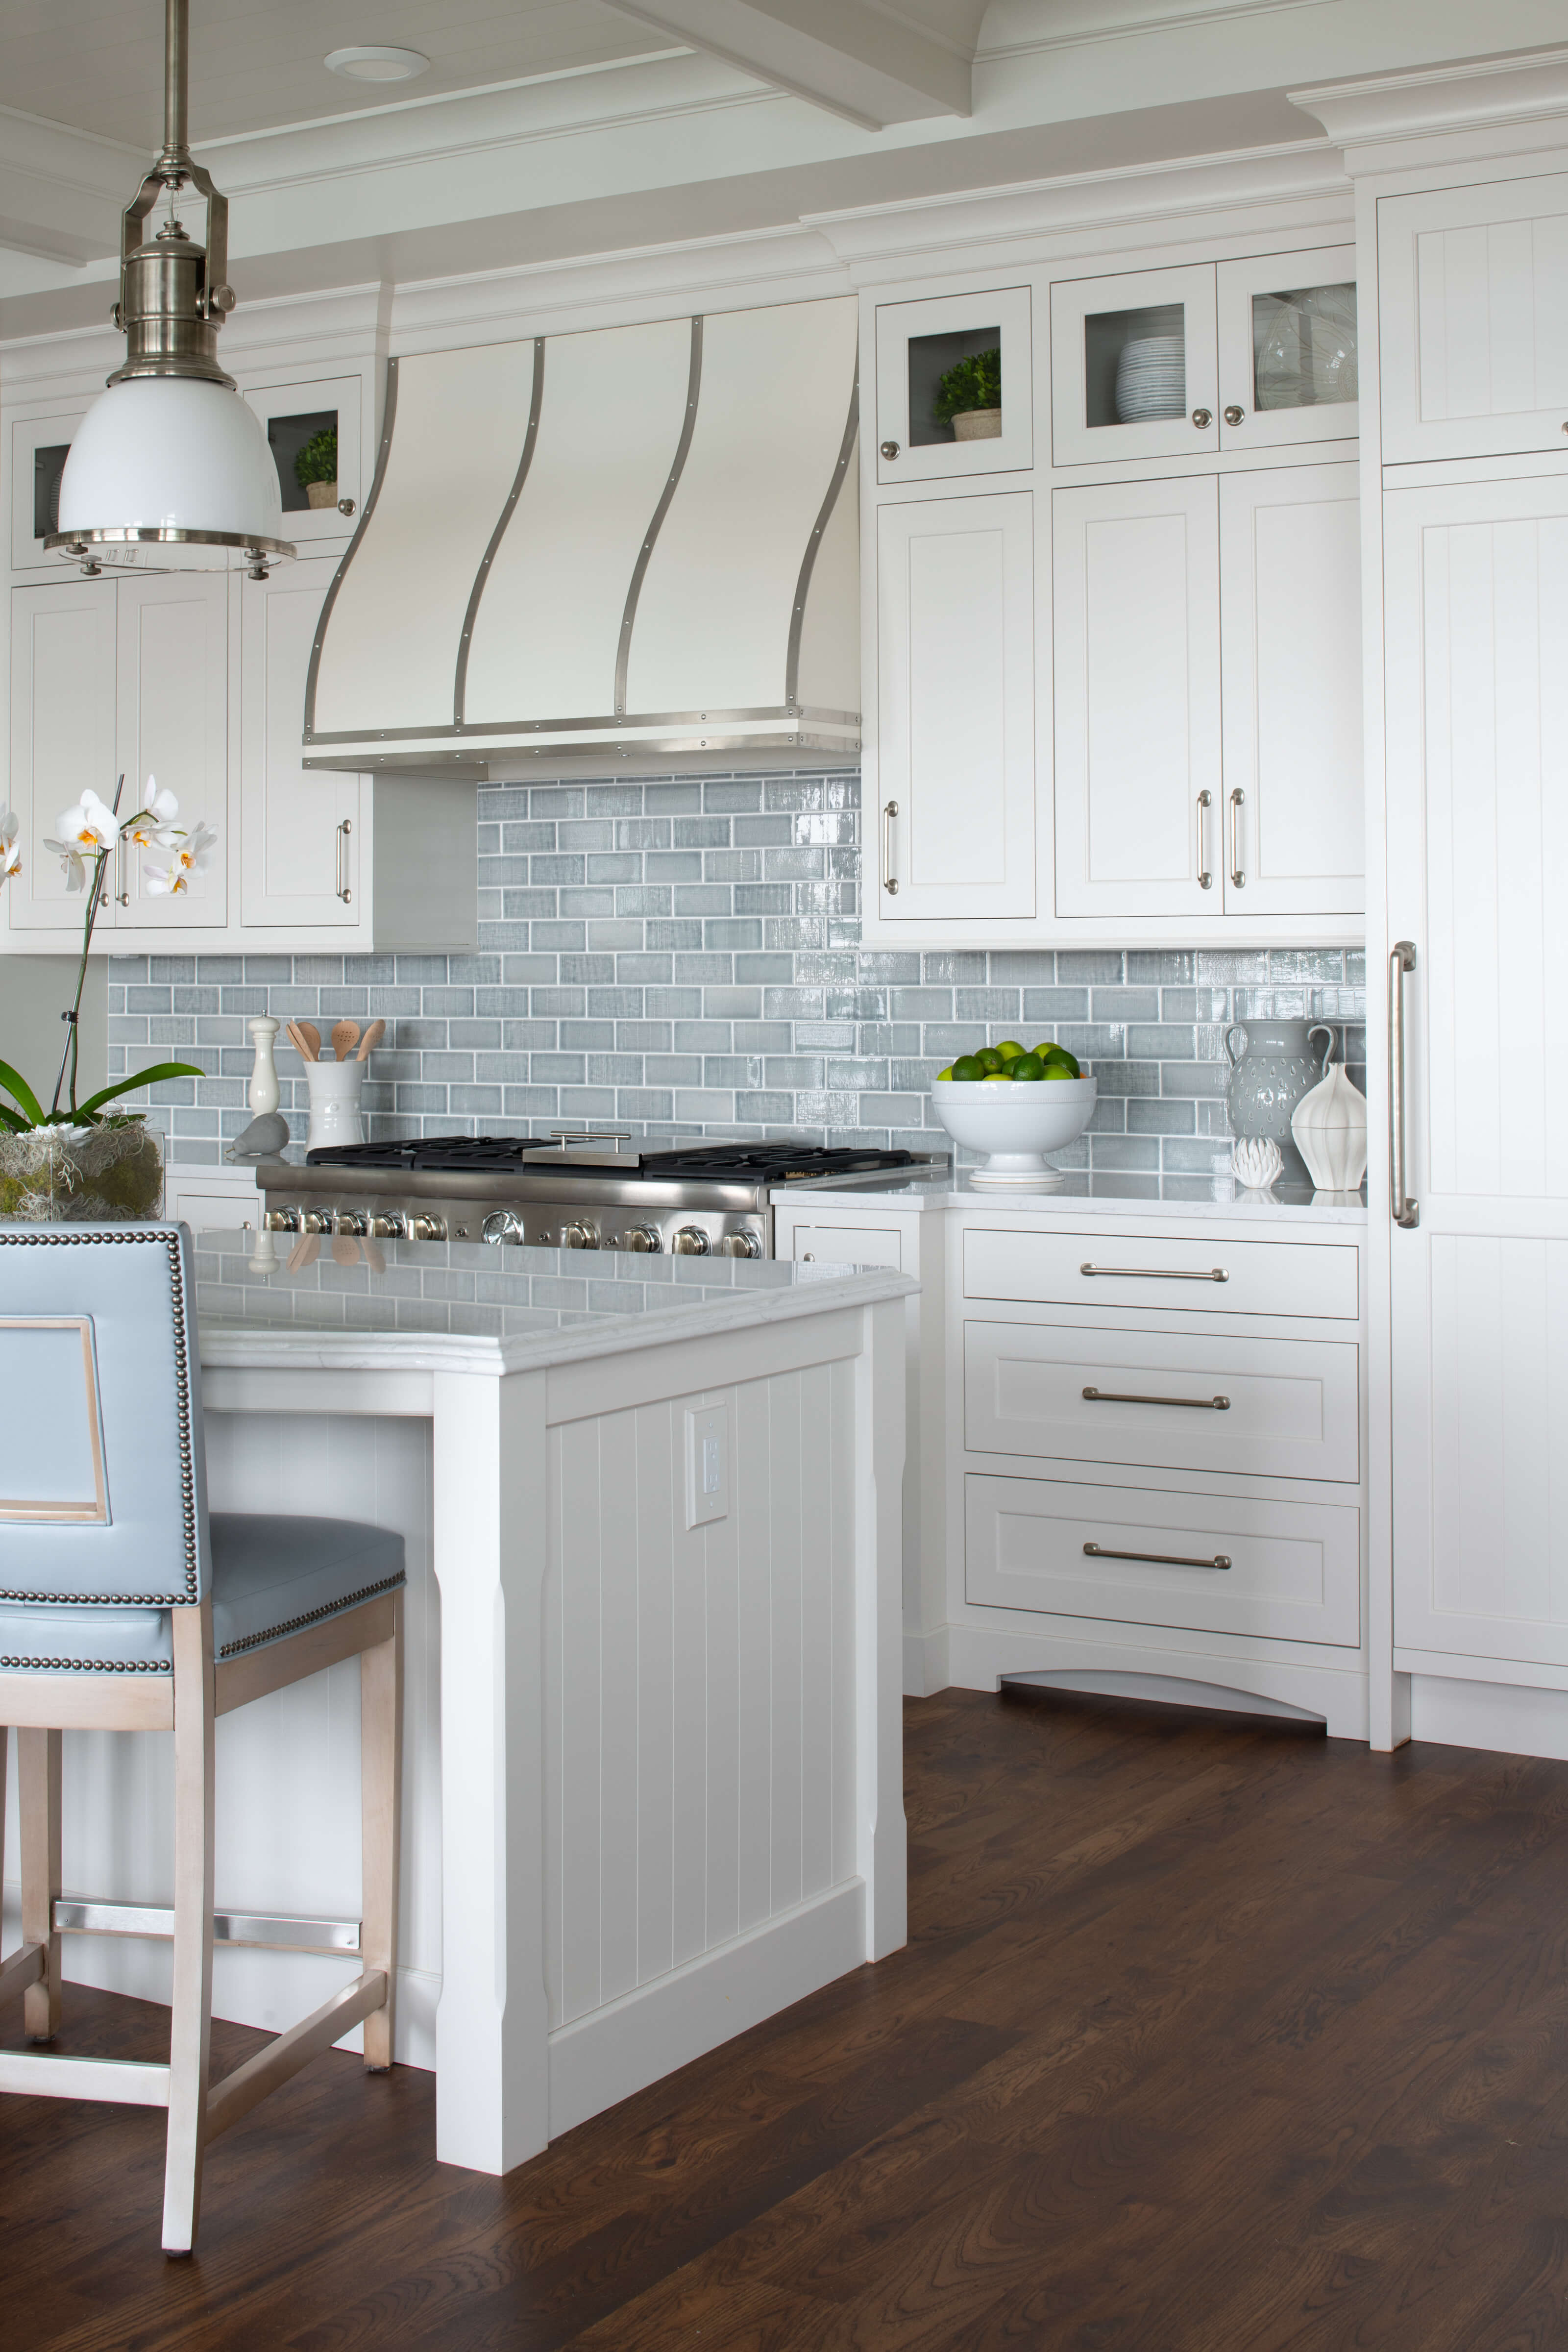 A coastal style kitchen with white painted inset cabinets with shiplap v-groove paneled doors and kitchen island end cap. The design features a light blue backsplash an island stools.